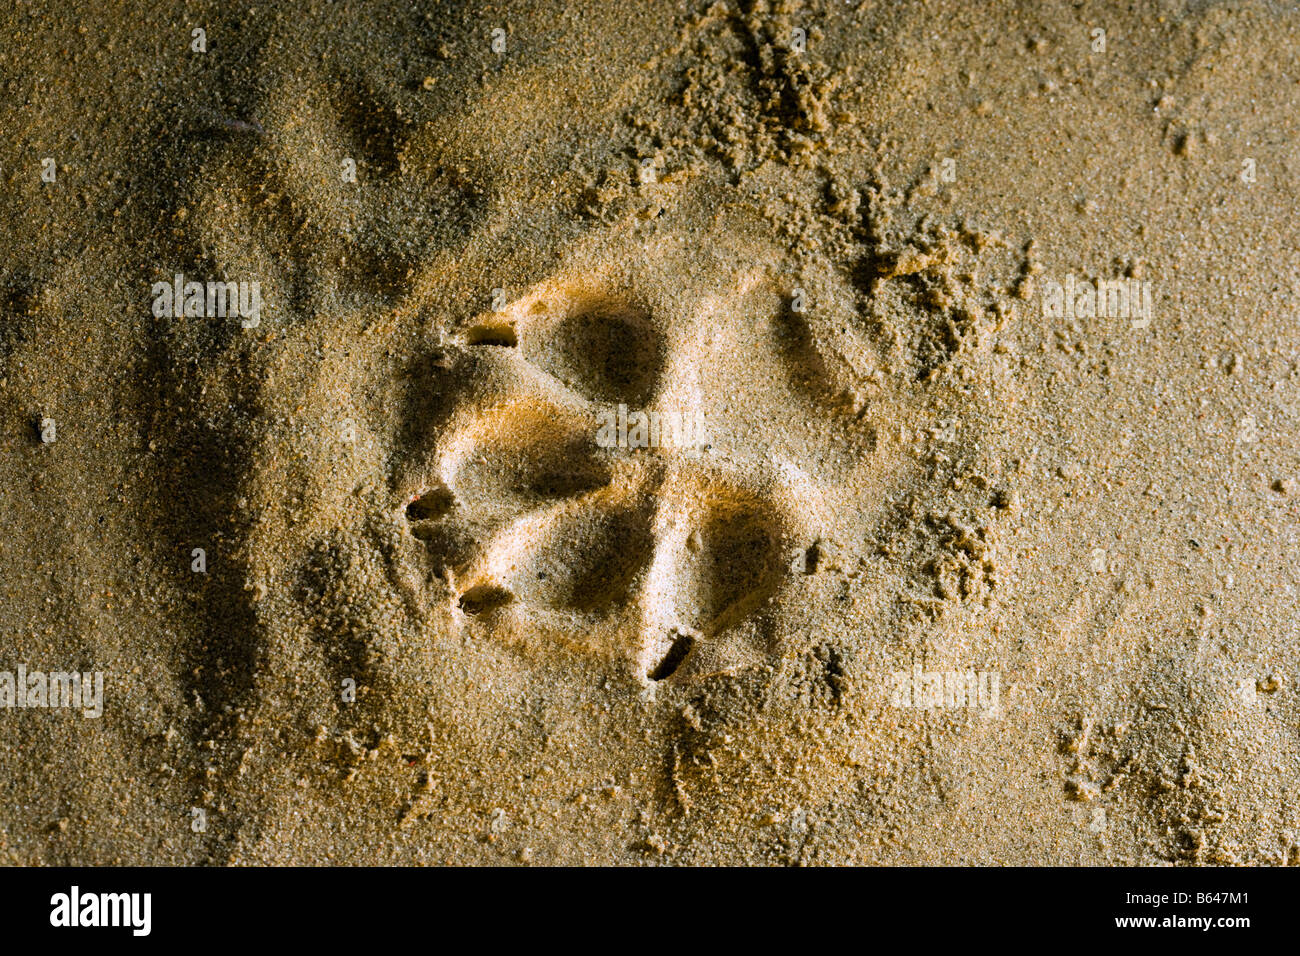 Finland, Kuhmo, Petola Visitor Center. Information about Finland's largest carnivores and preditors. Footprint of wolf. Stock Photo